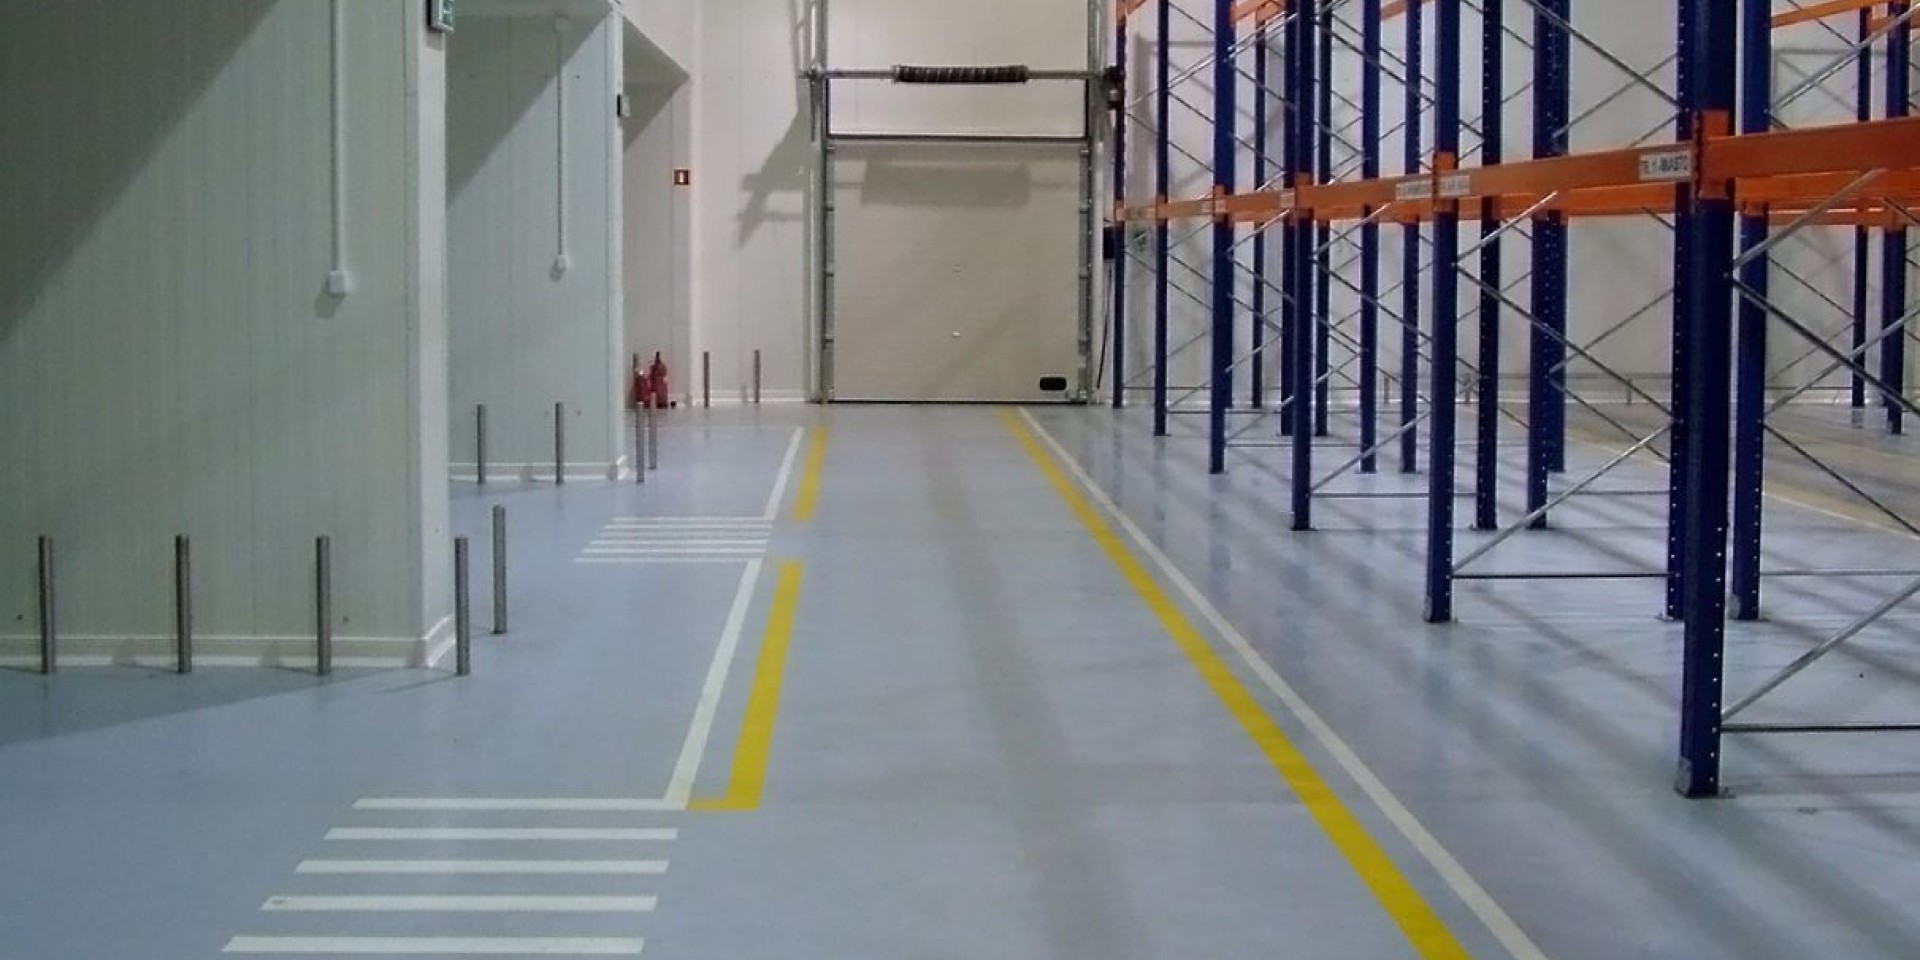 Coating solutions for concrete floors in warehouses